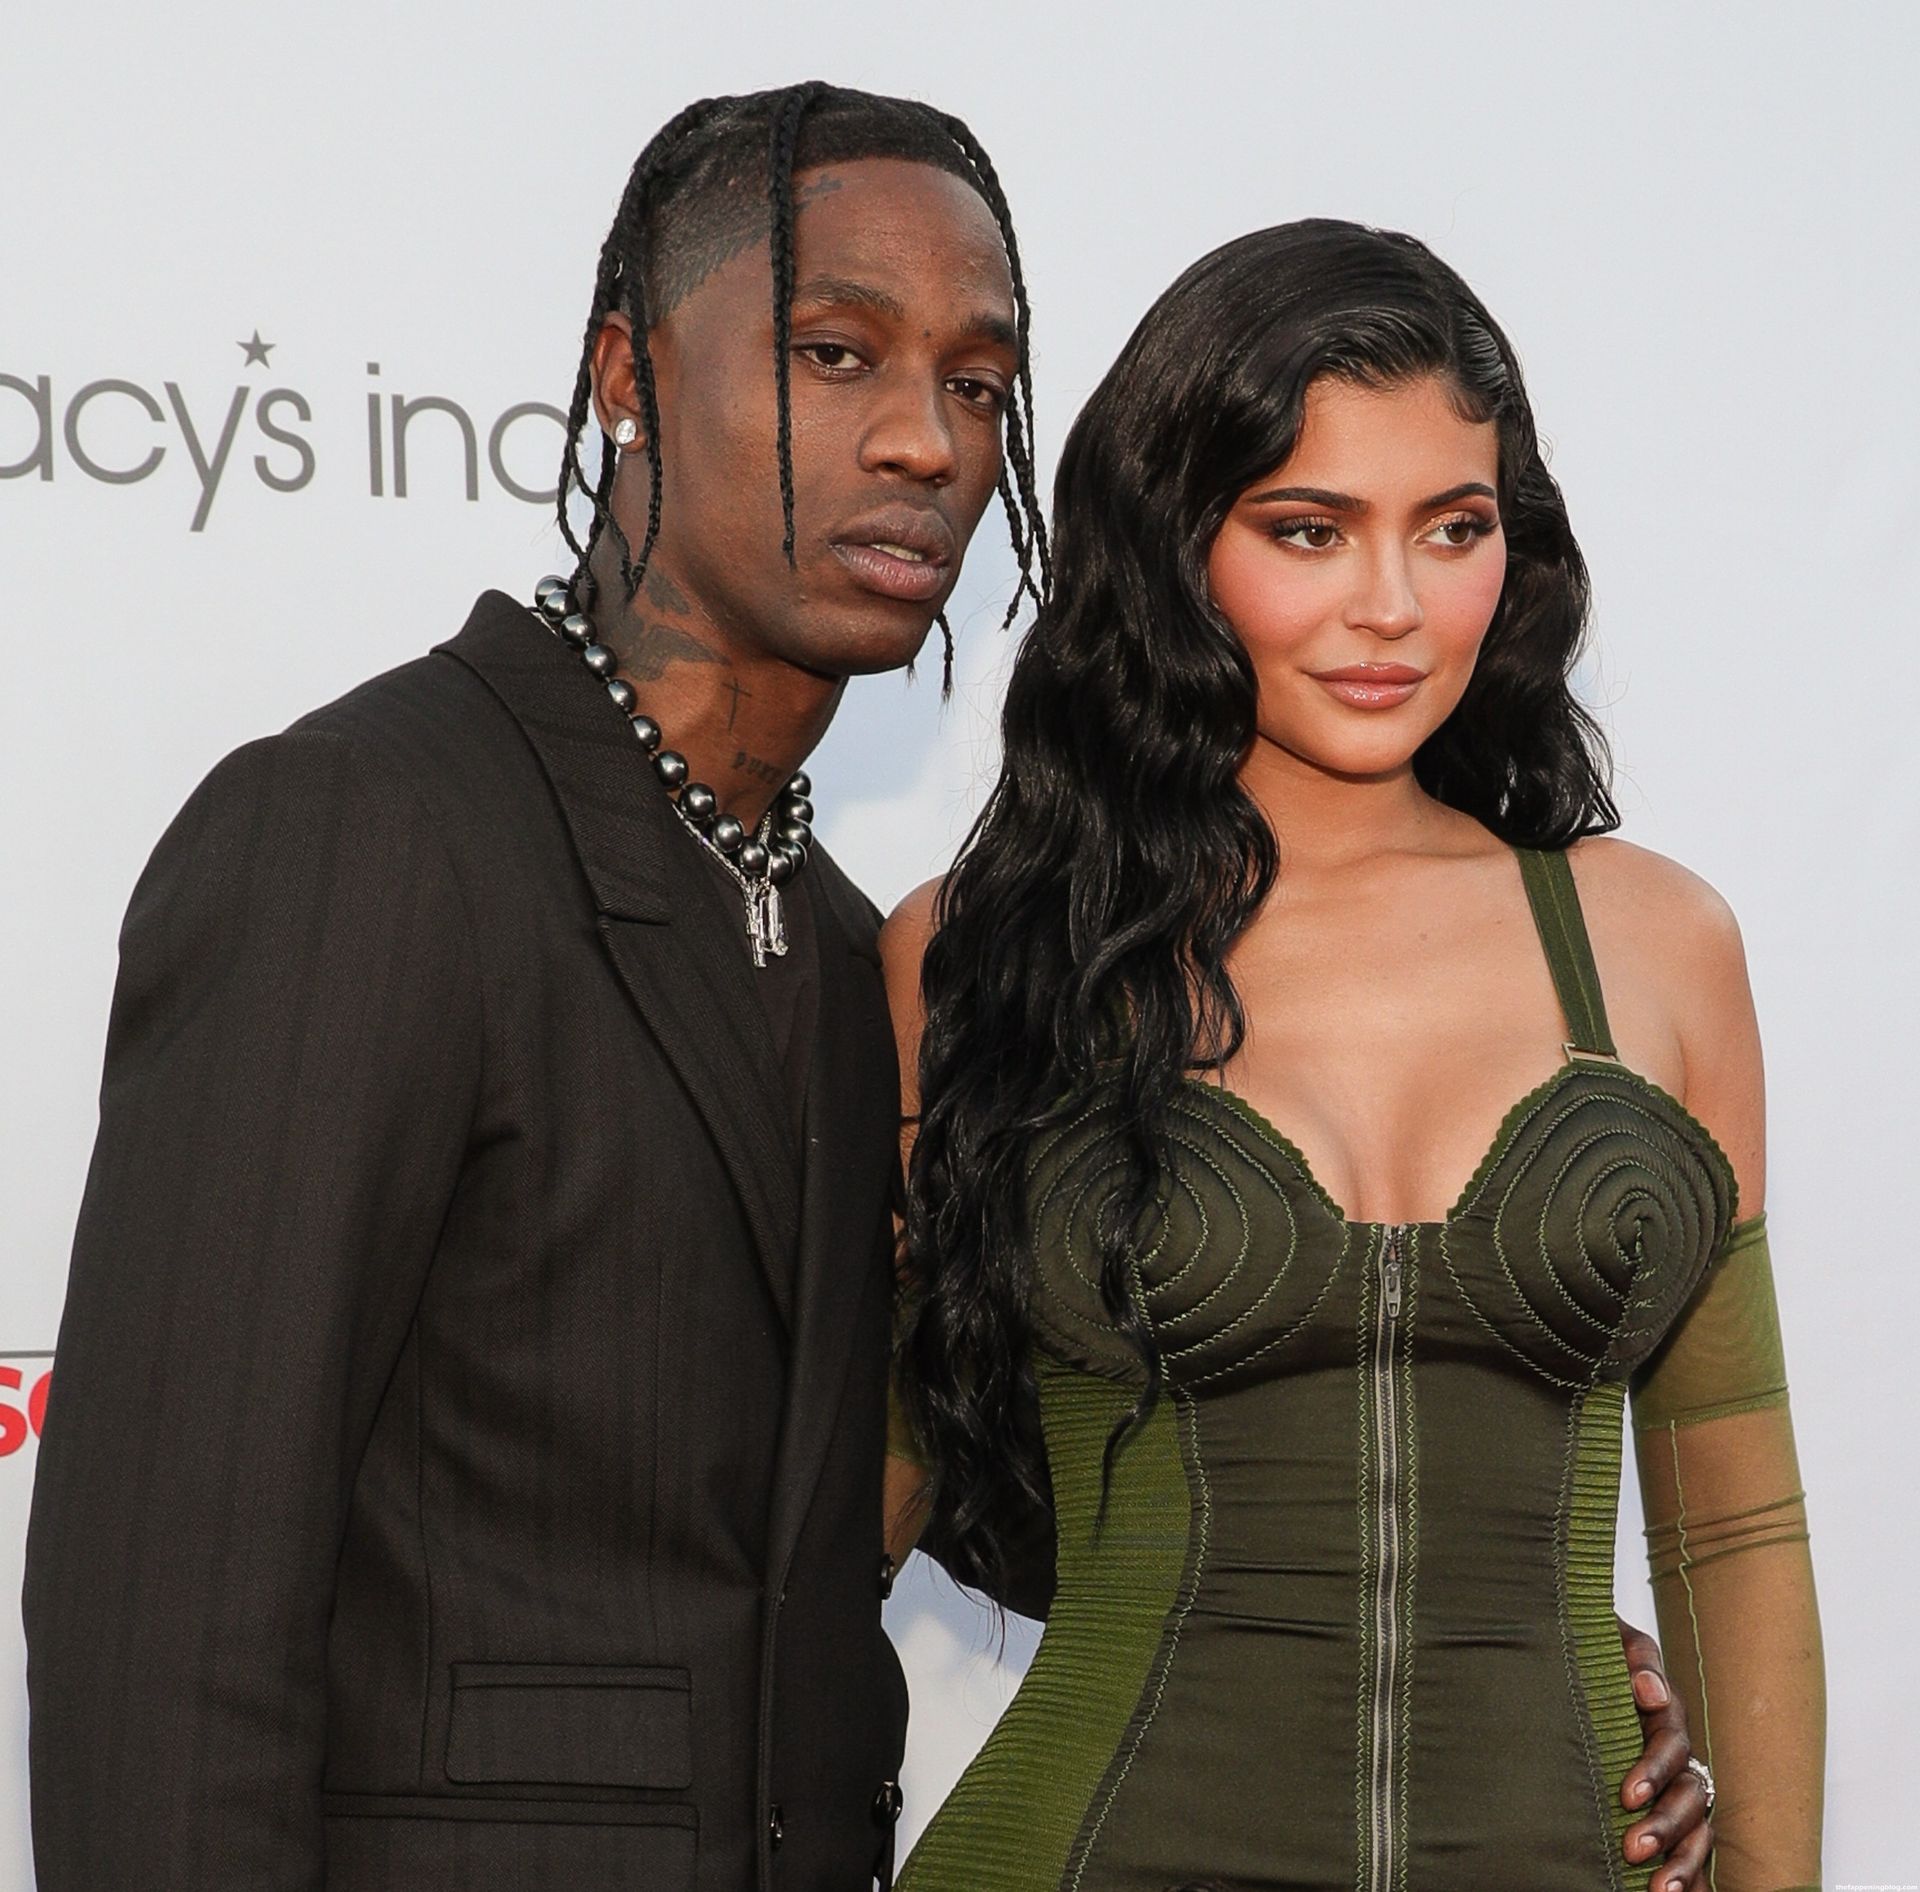 Kylie Jenner & Travis Scott are Seen Attending the Parsons Benefit in NY (91 Photos)